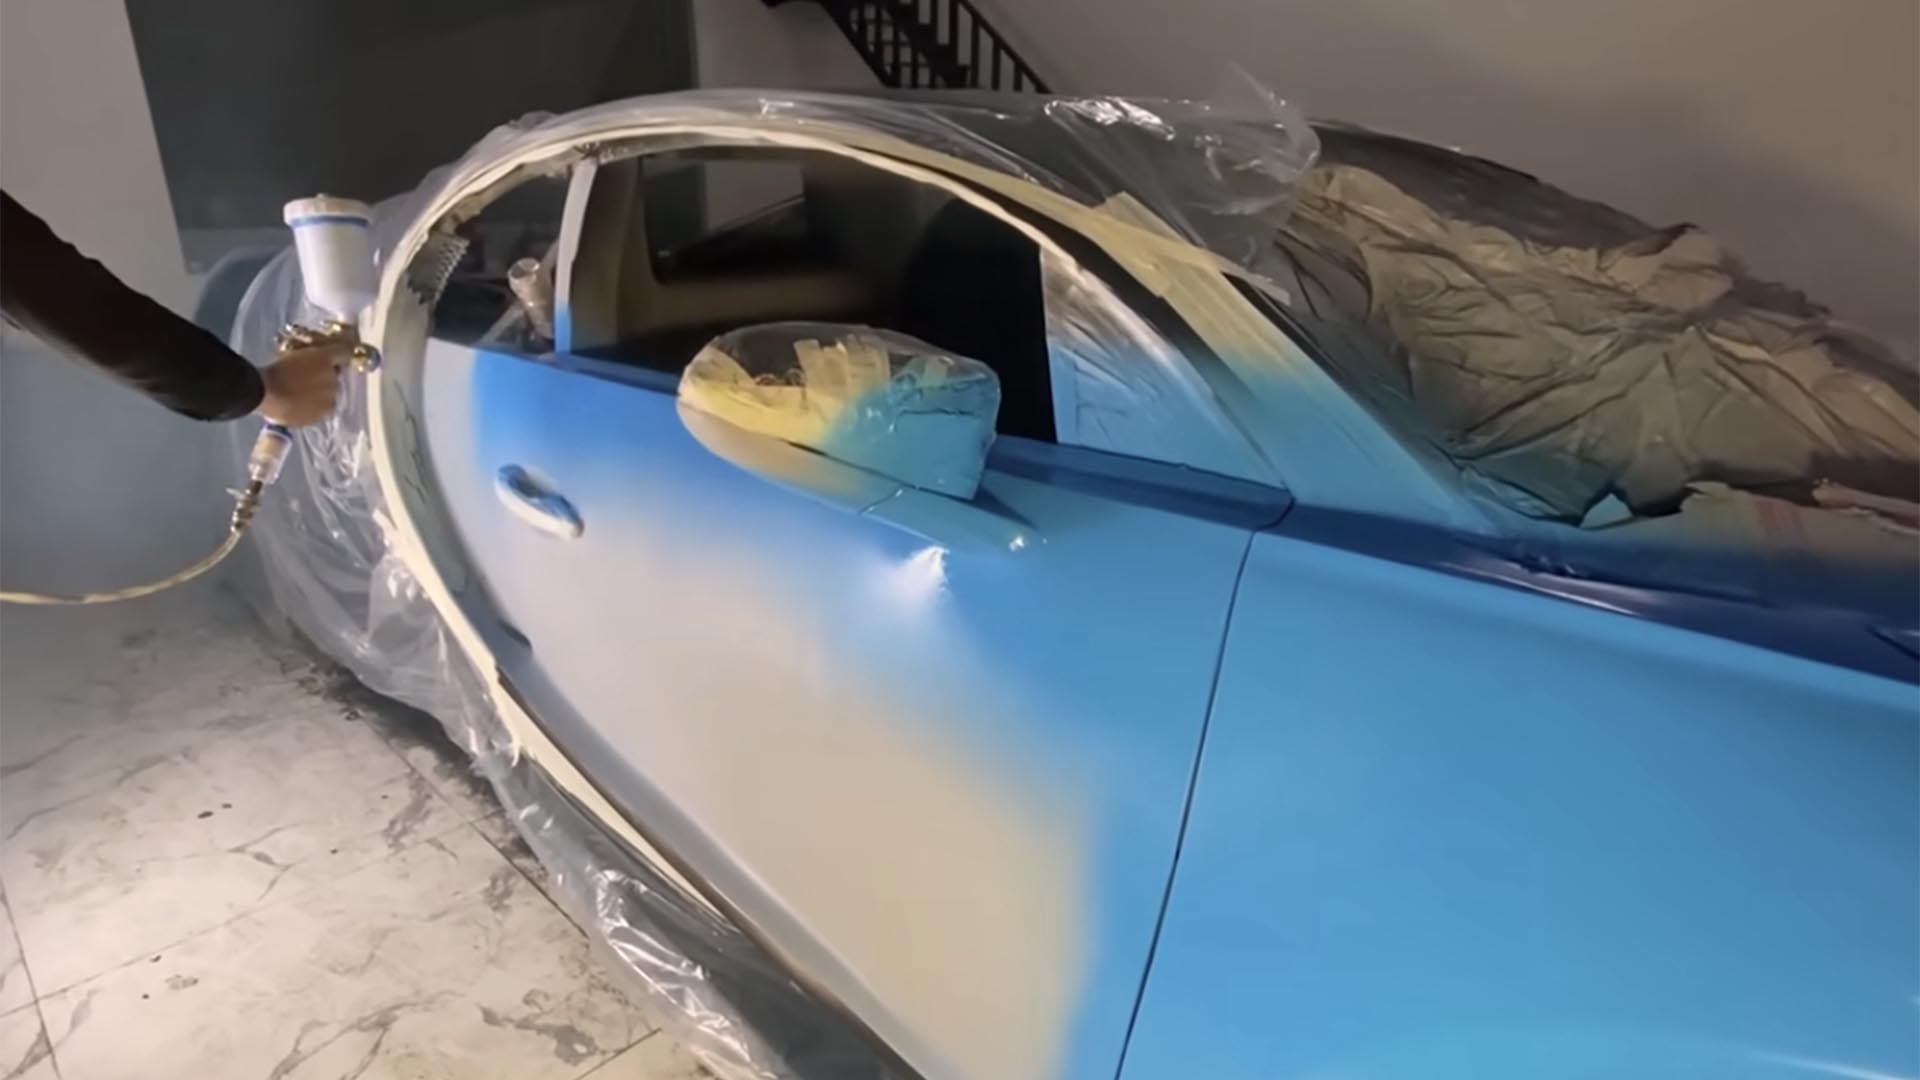 The final stage of the paint finished leaving the Bugatti mud looking like the real car, combining blue and black.